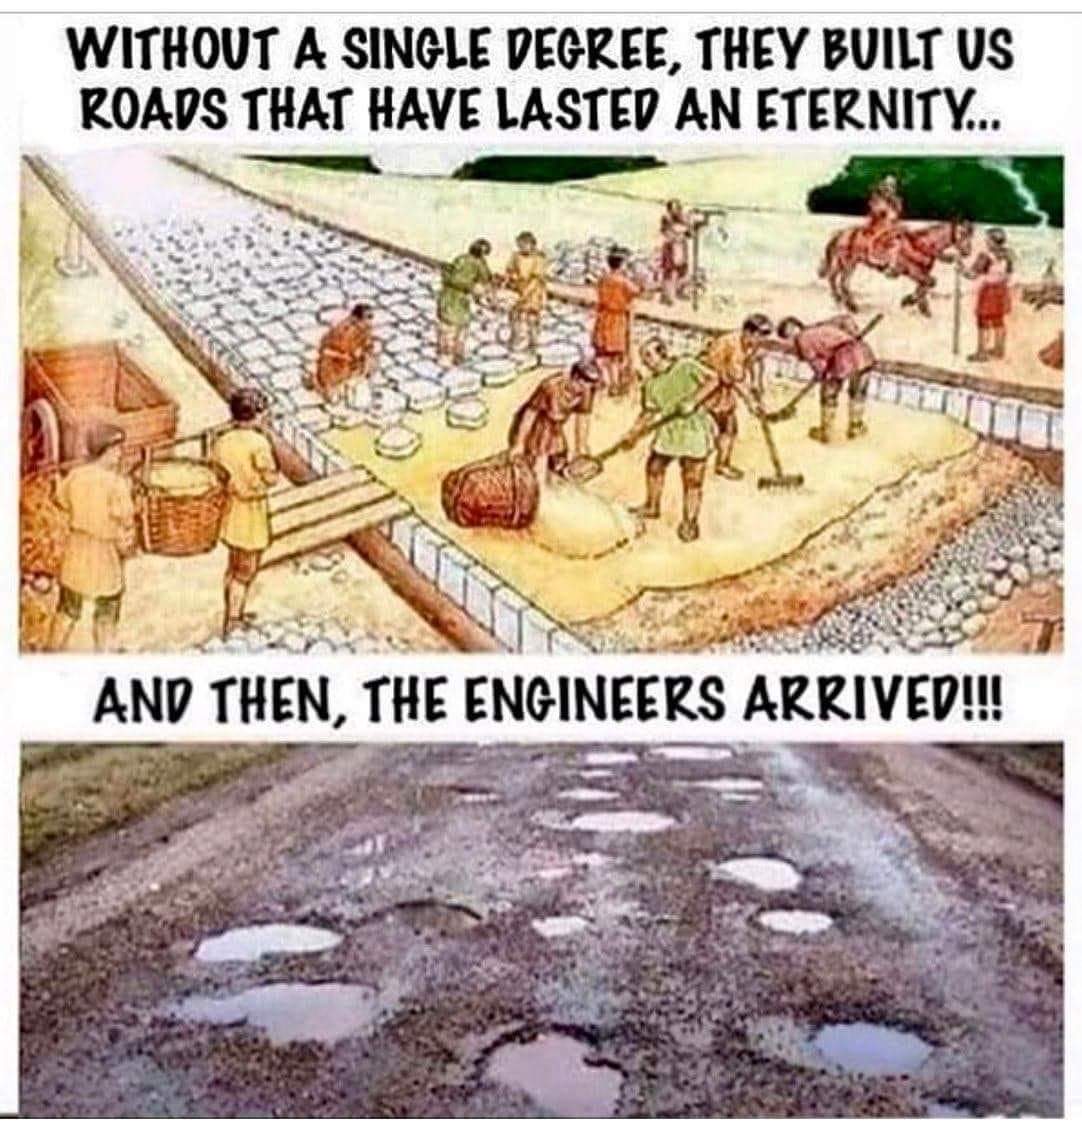 without a single degree they built us roads - Without A Single Degree, They Built Us Roads That Have Lasted An Eternity... And Then, The Engineers Arrived!!!